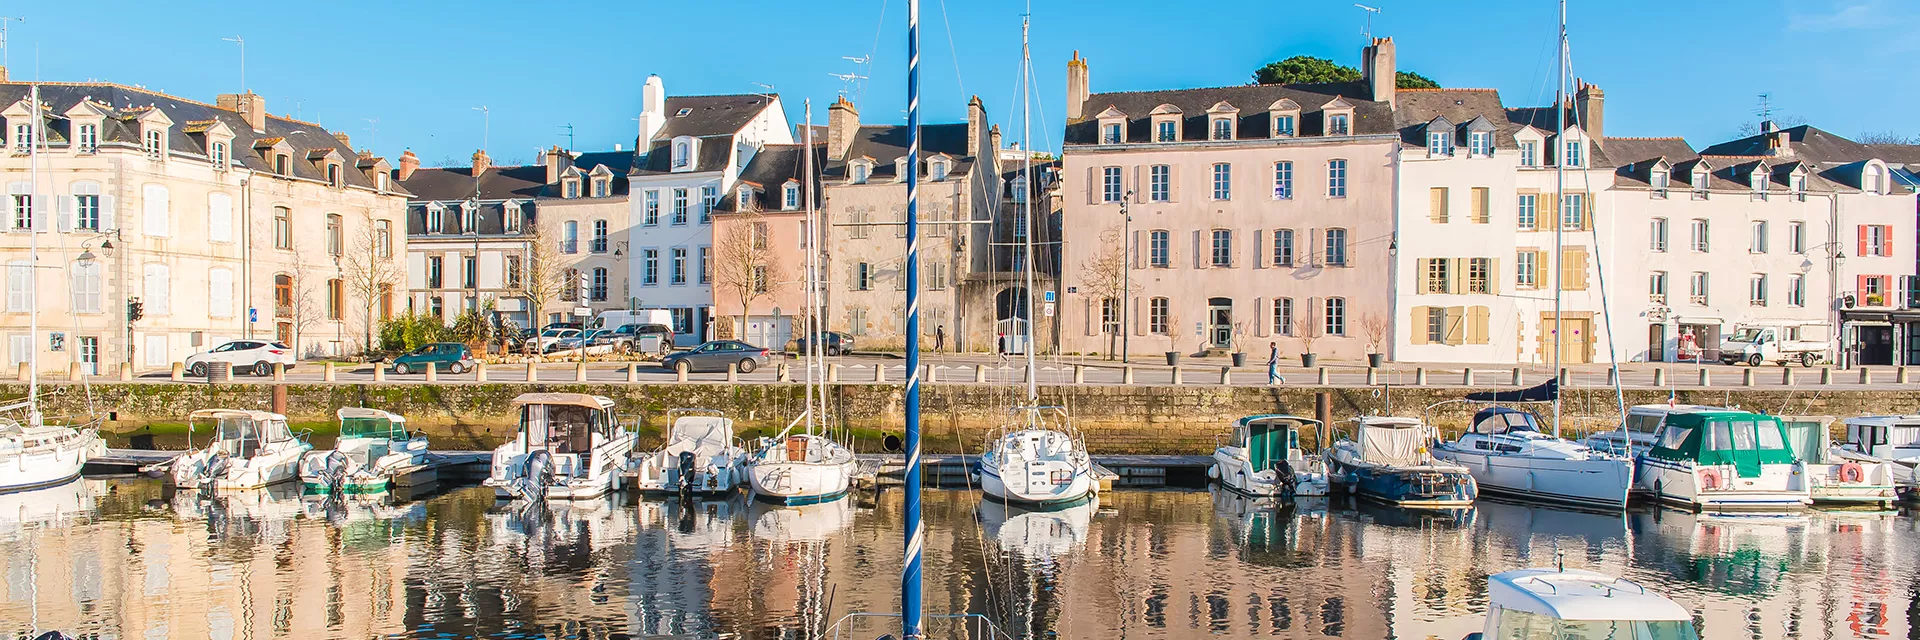 Holiday residence rental at Vannes